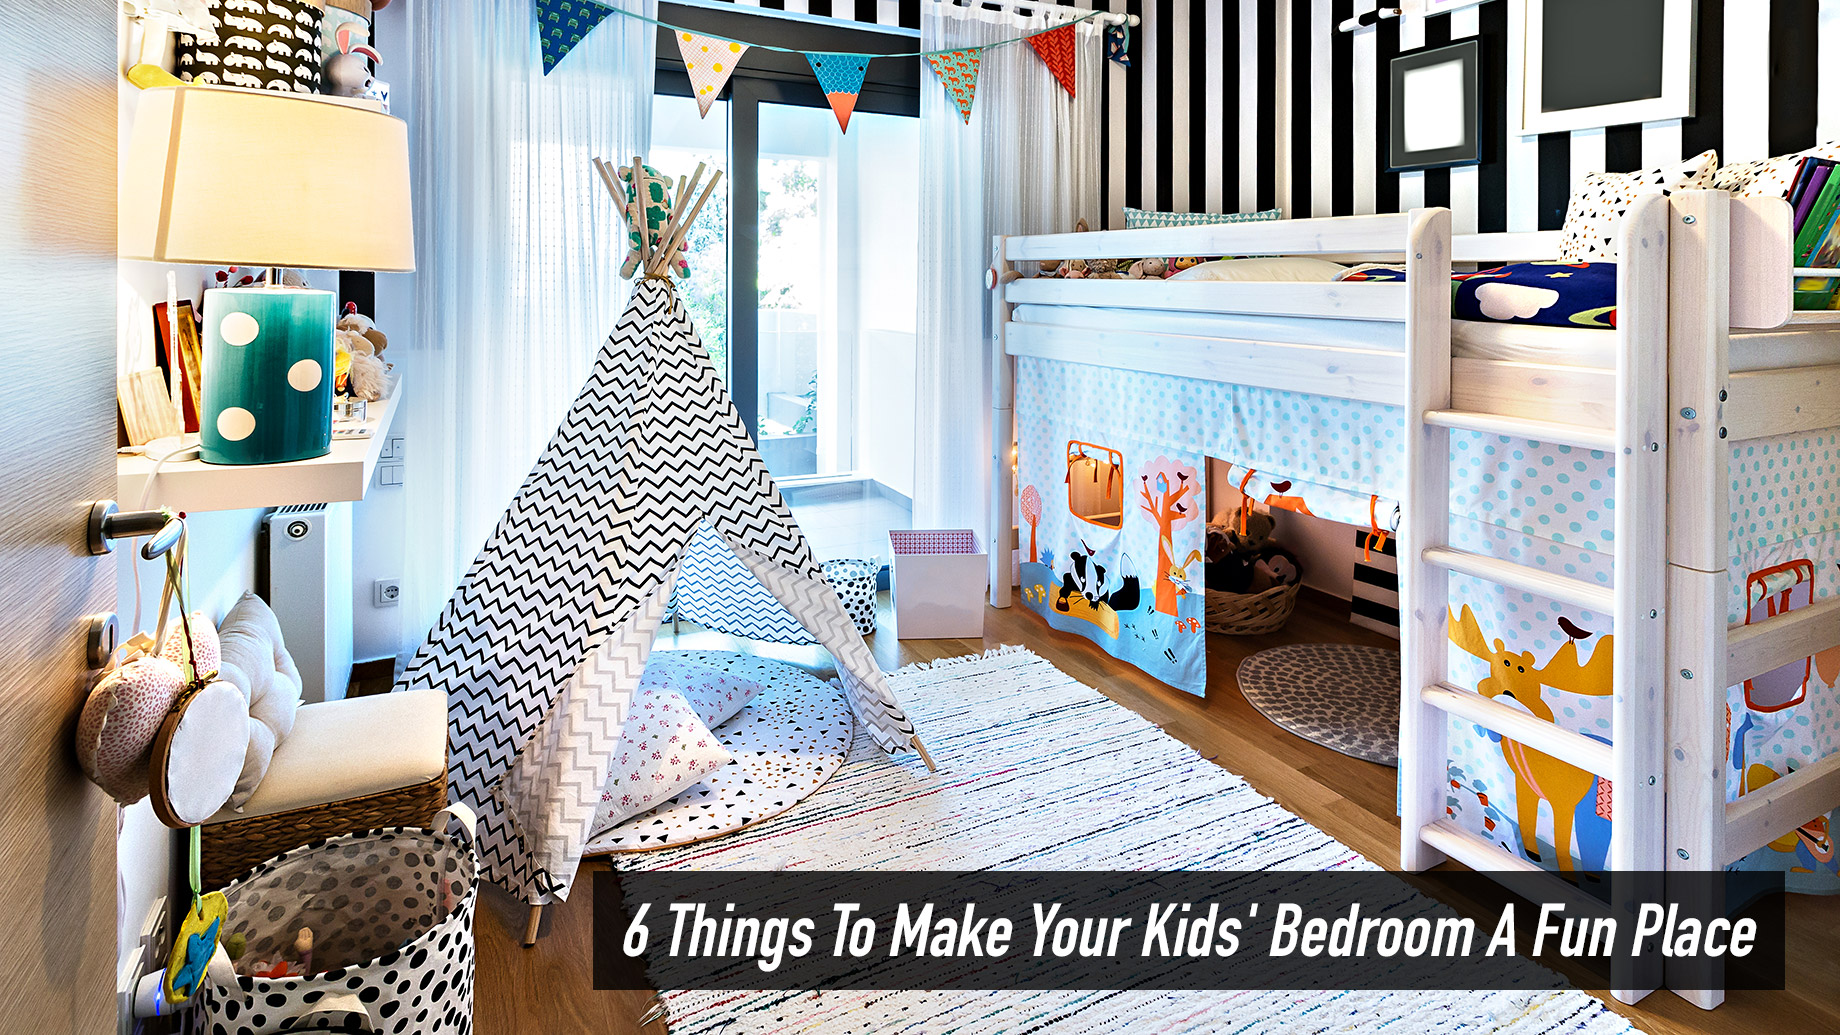 6 Things To Make Your Kids' Bedroom A Fun Place